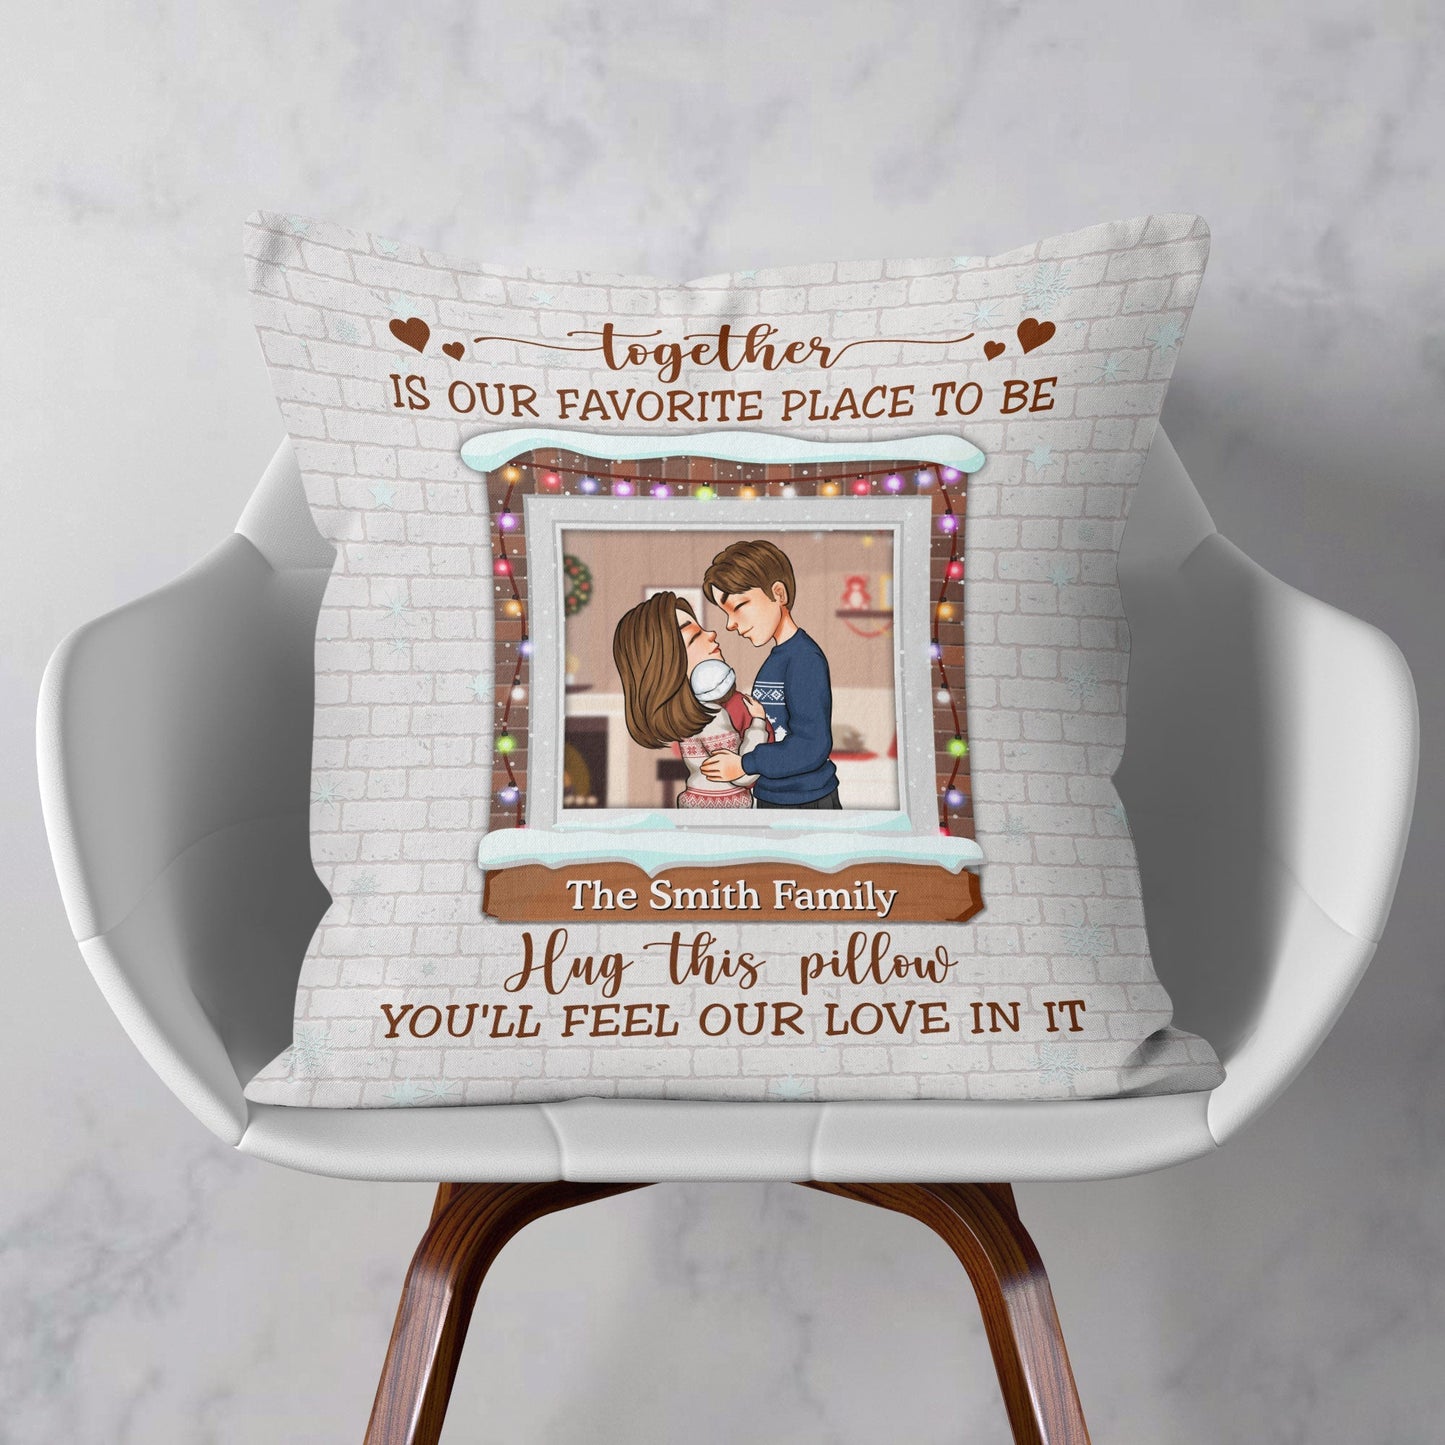 Our Love Our Home - Personalized Pillow - Christmas Gift For Husband, Wife, Anniversary, Newly Wed, Newborn Baby